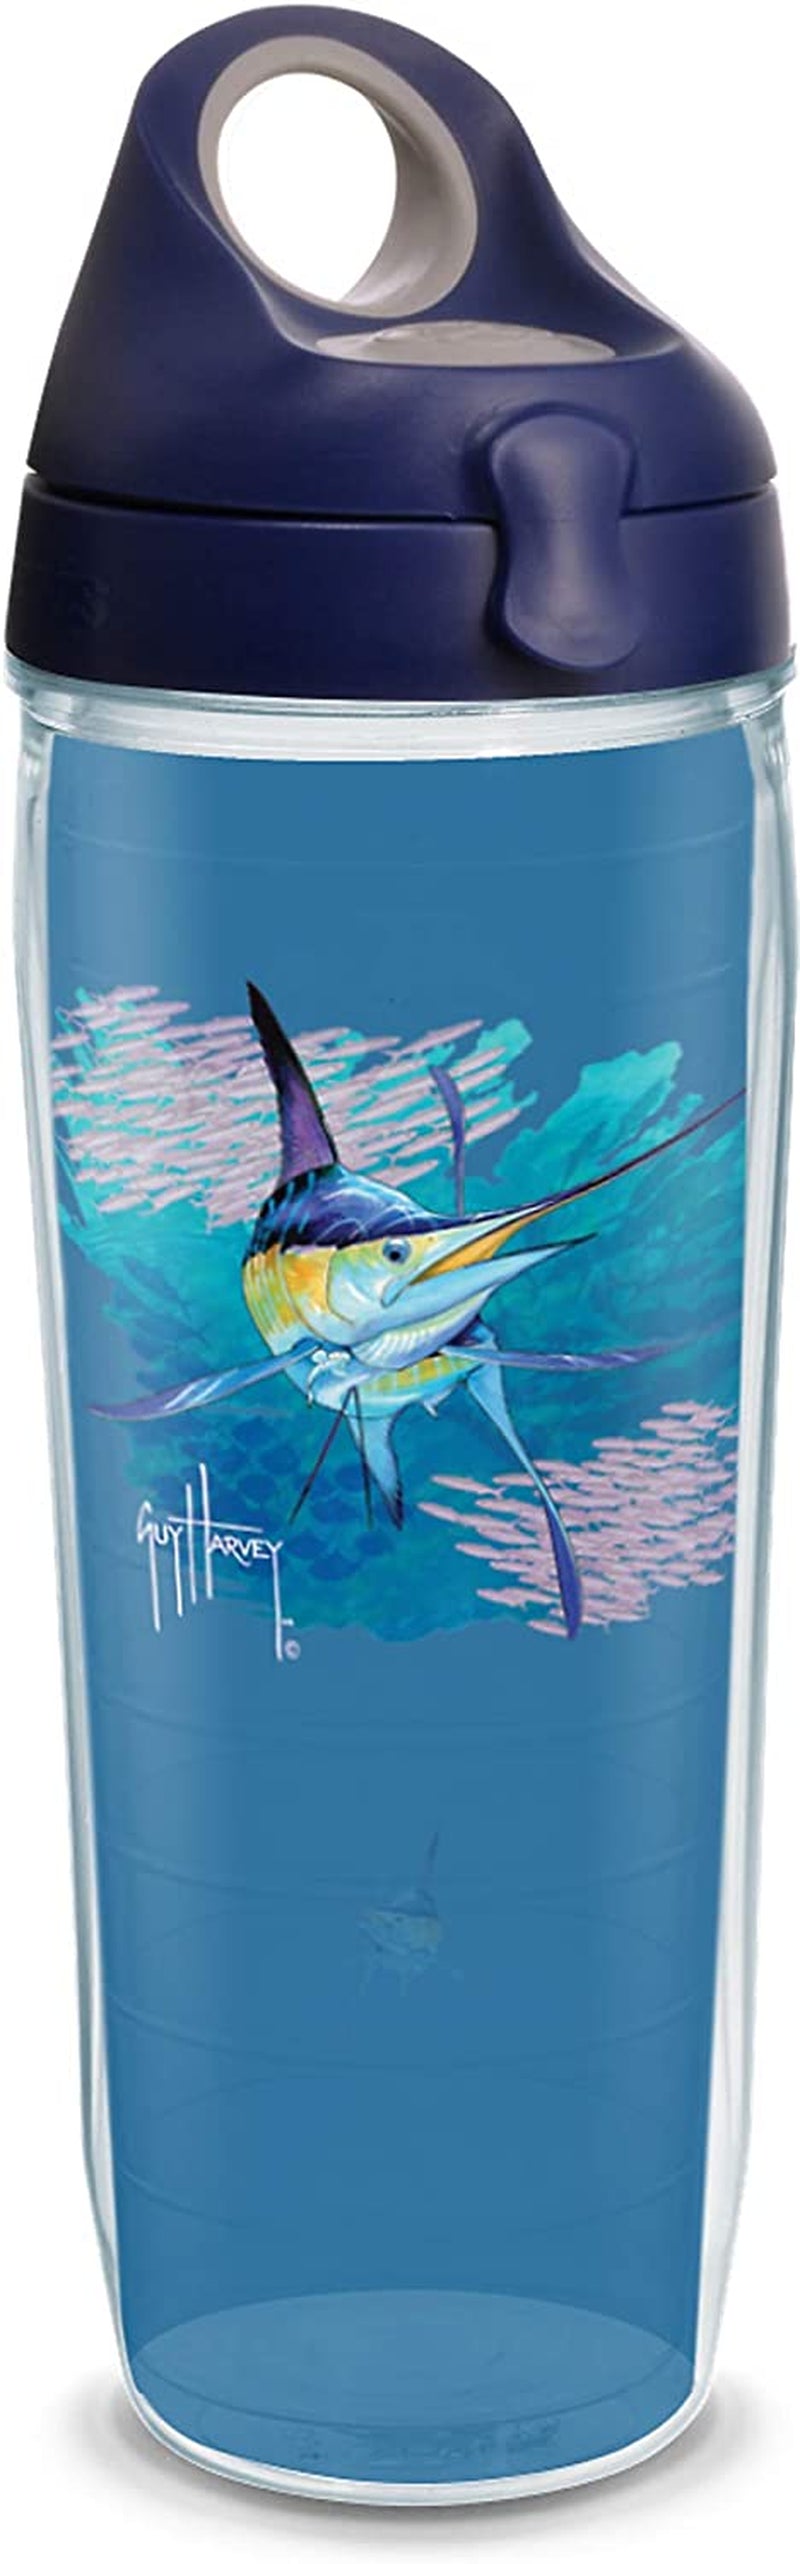 Tervis Made in USA Double Walled Guy Harvey - Offshore Haul Marlin Insulated Tumbler Cup Keeps Drinks Cold & Hot, 16Oz Mug, Classic Home & Garden > Kitchen & Dining > Tableware > Drinkware Tervis Classic 24oz Water Bottle 